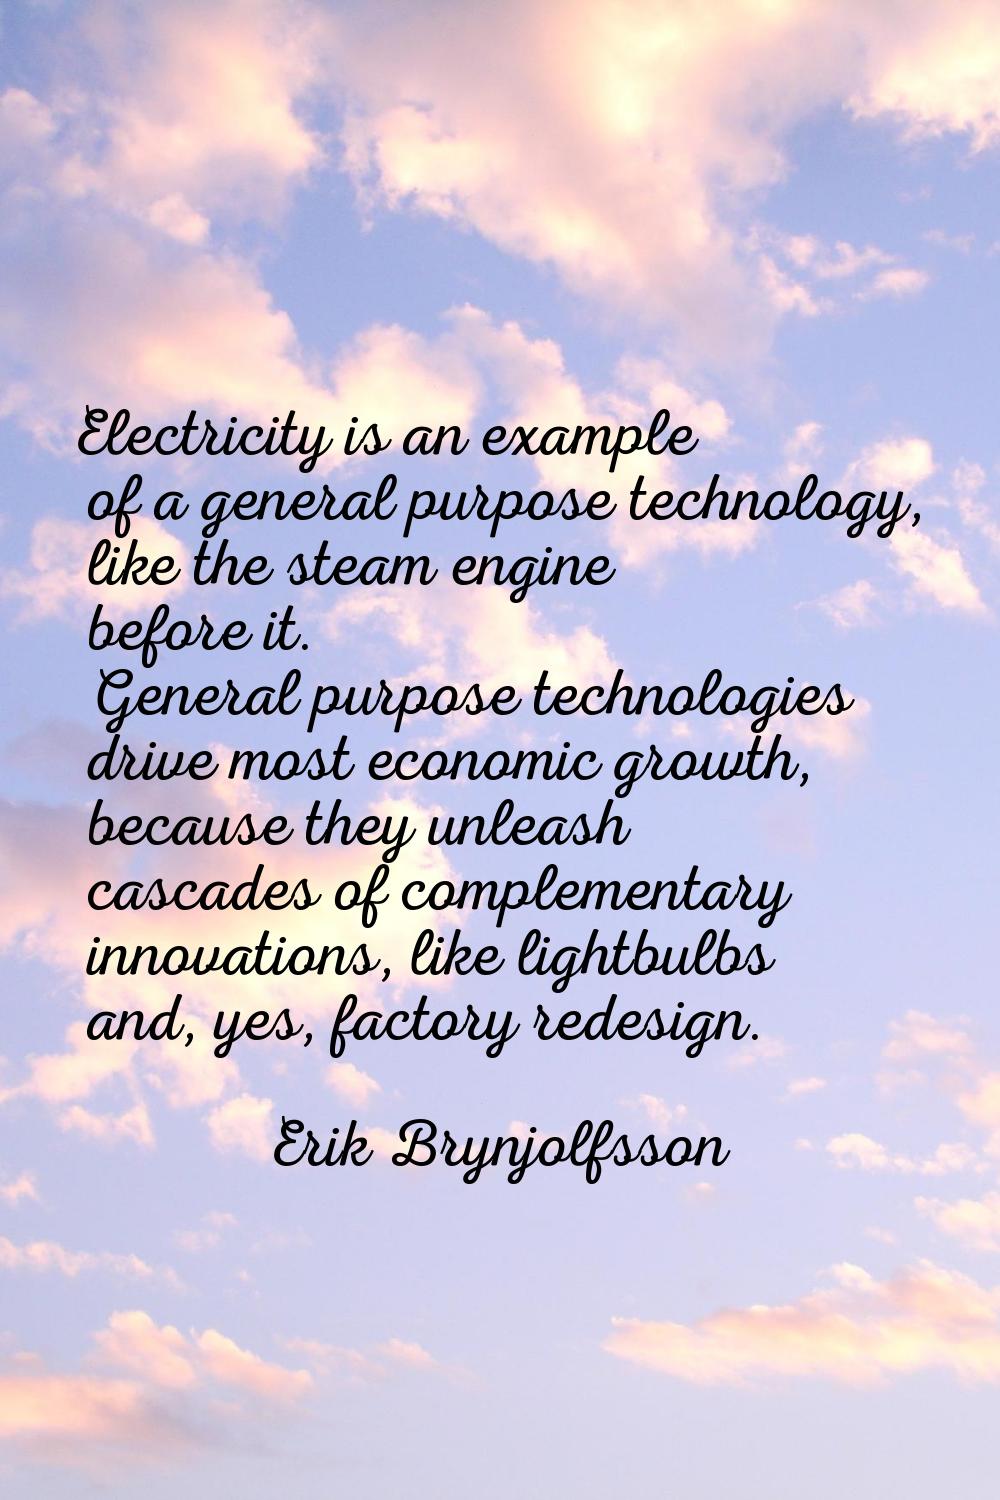 Electricity is an example of a general purpose technology, like the steam engine before it. General